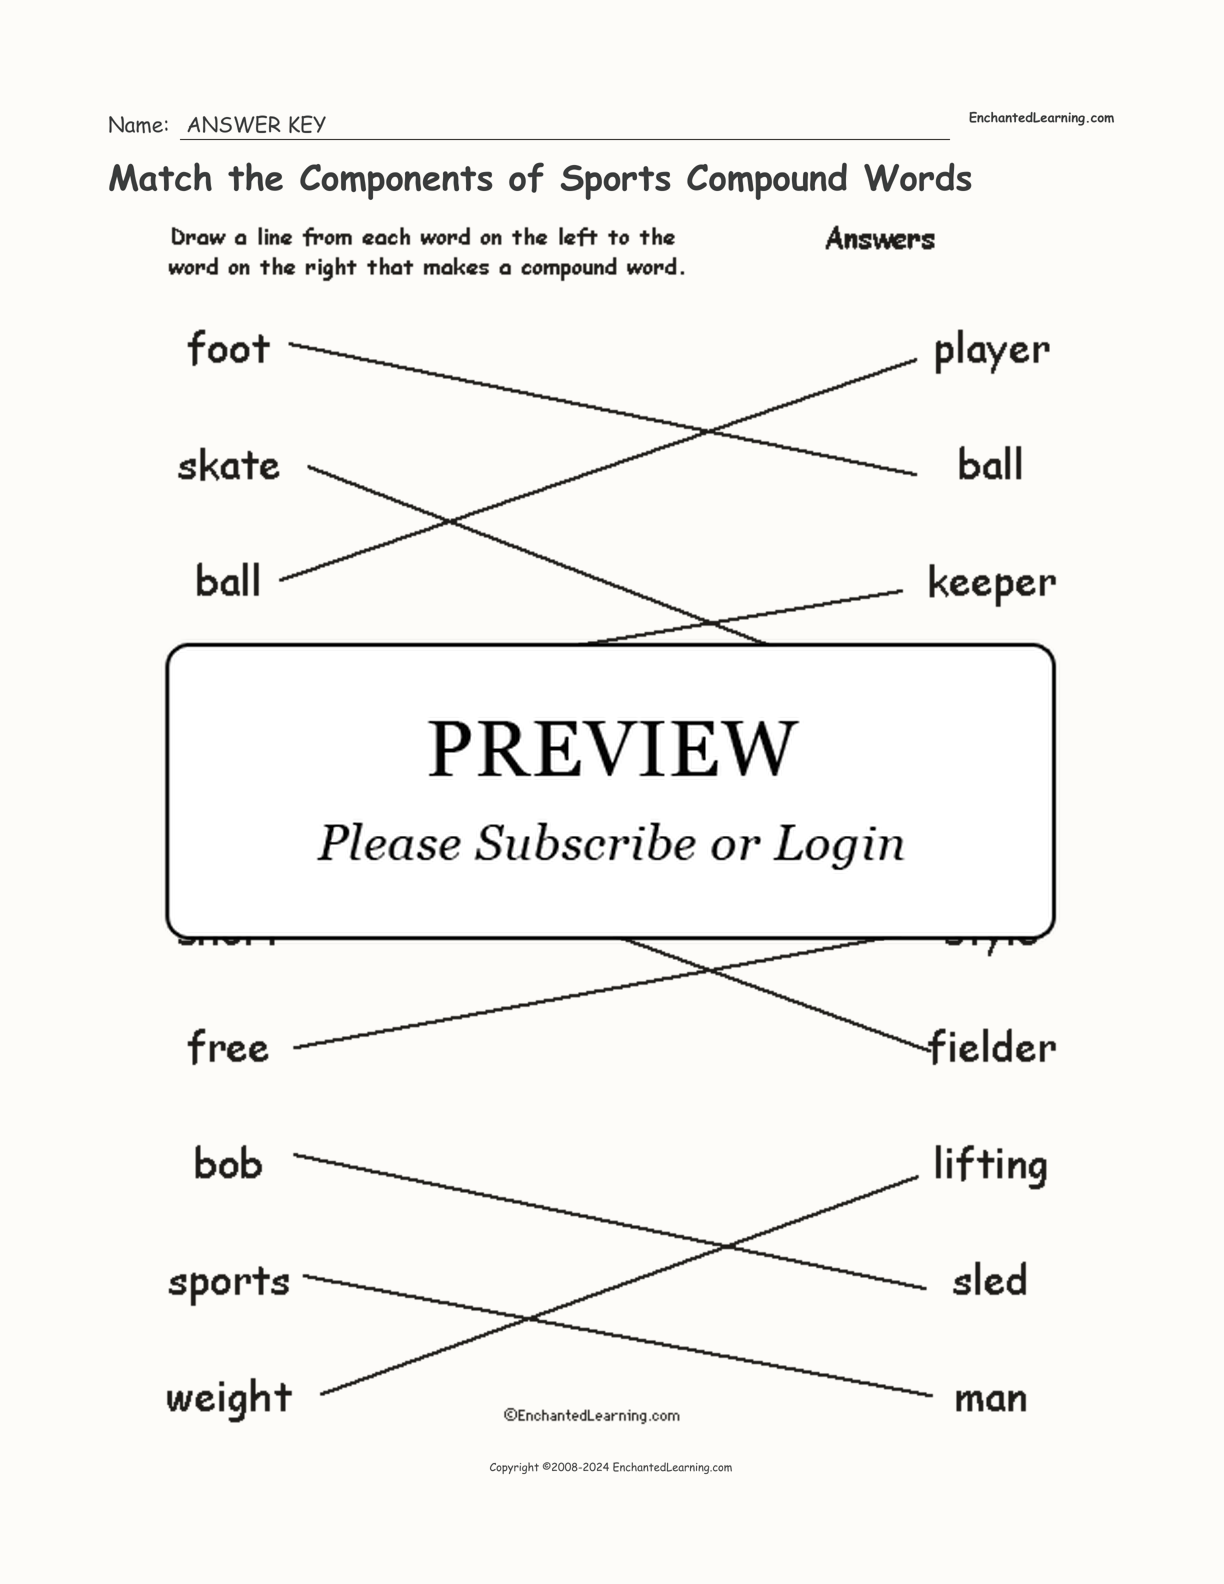 Match the Components of Sports Compound Words interactive worksheet page 2